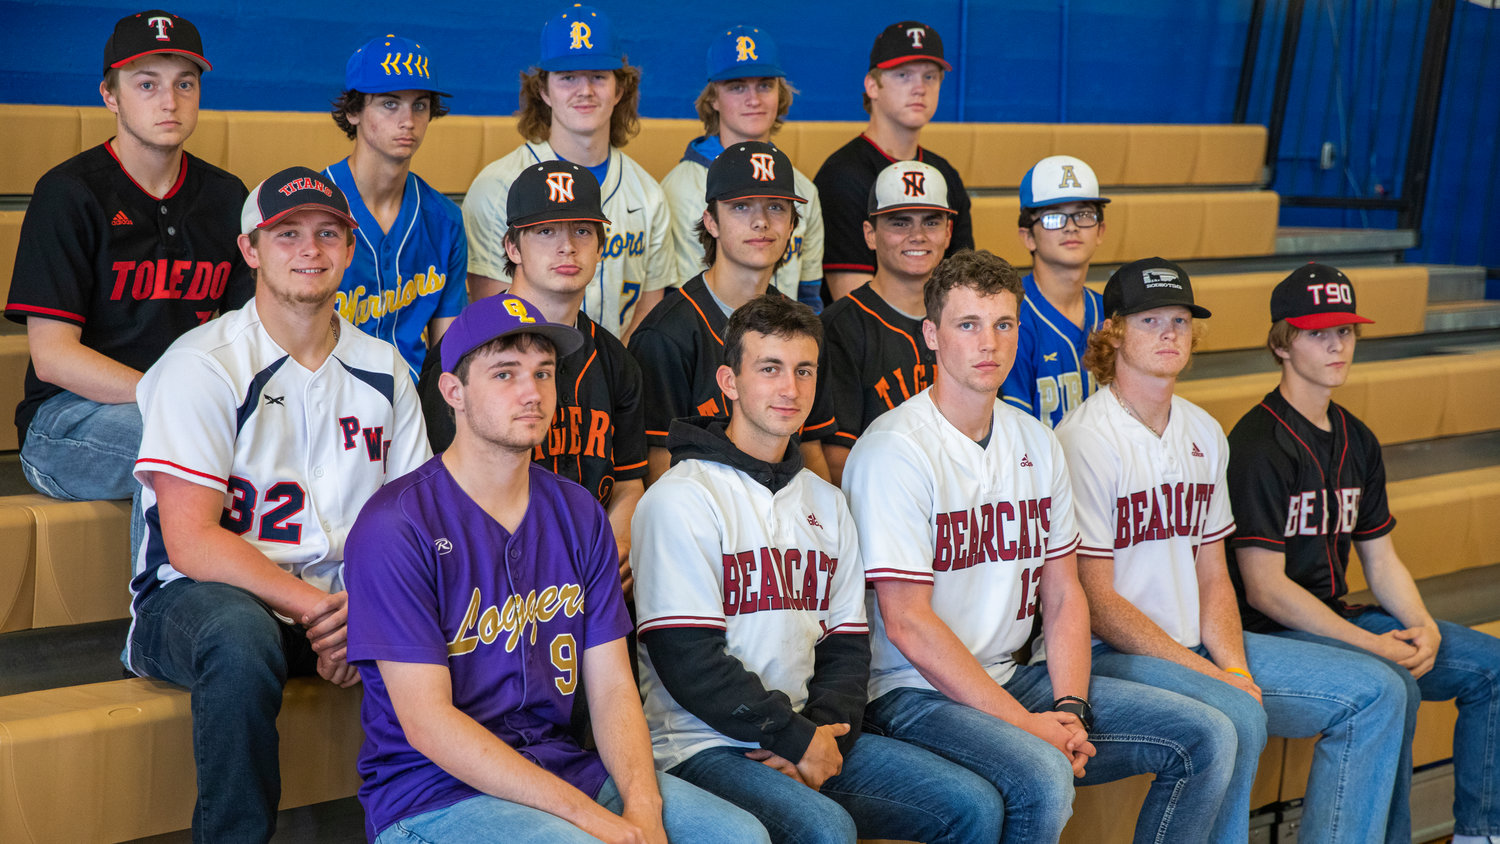 All-area athletes pose for a photo sporting their high school baseball jerseys on Thursday, June 9, 2022.